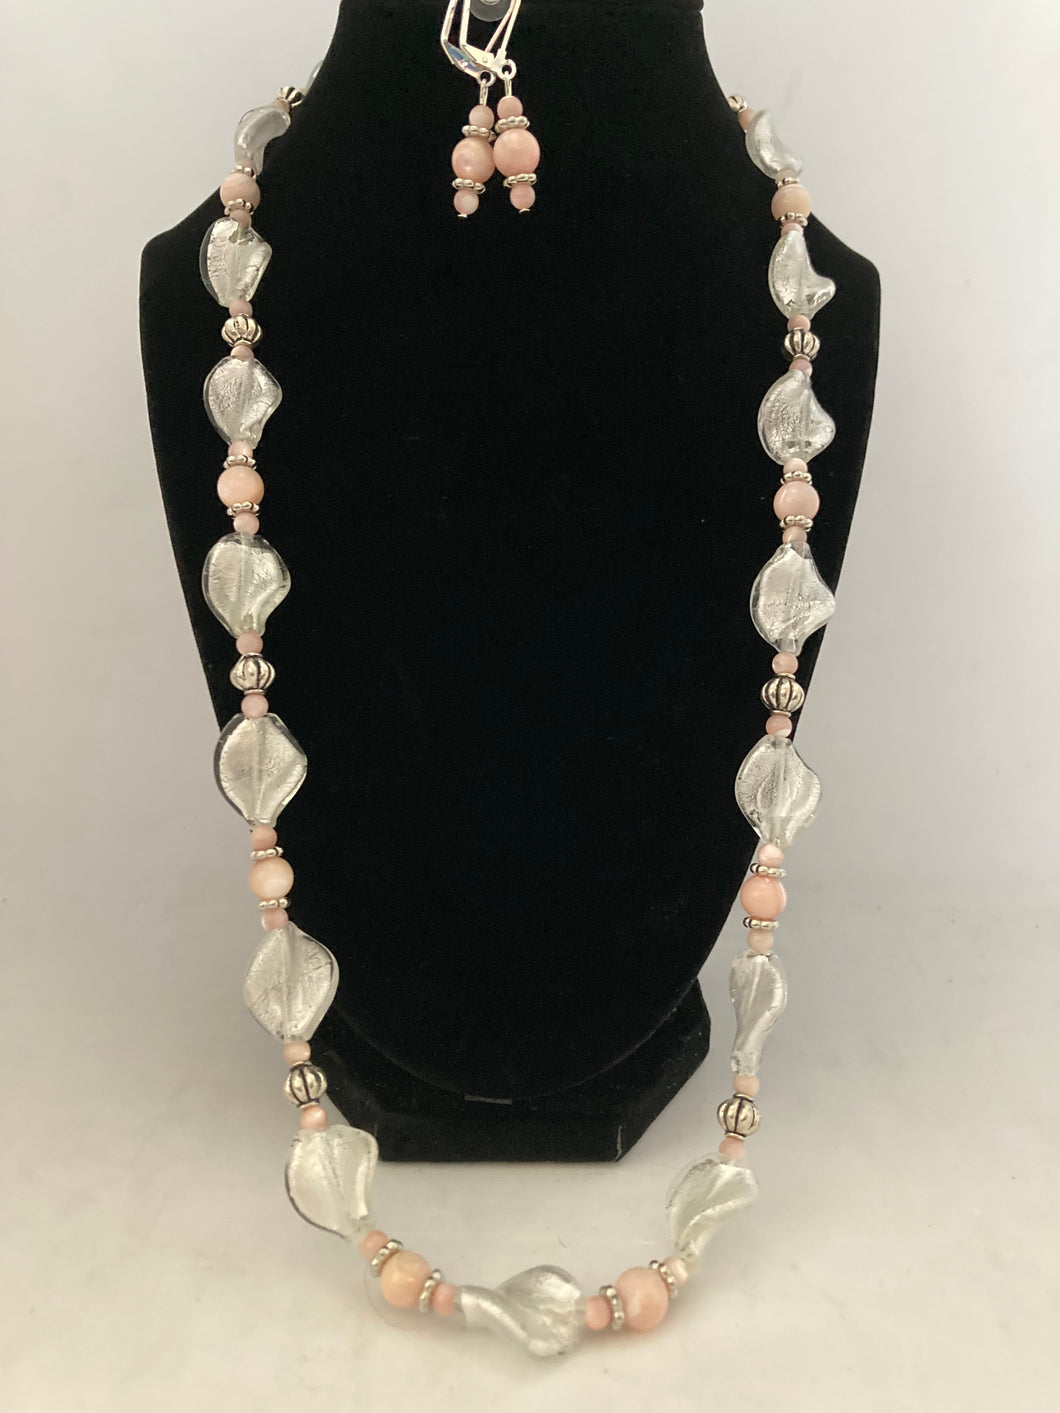 Natural shell and mother of pearl necklace with earrings